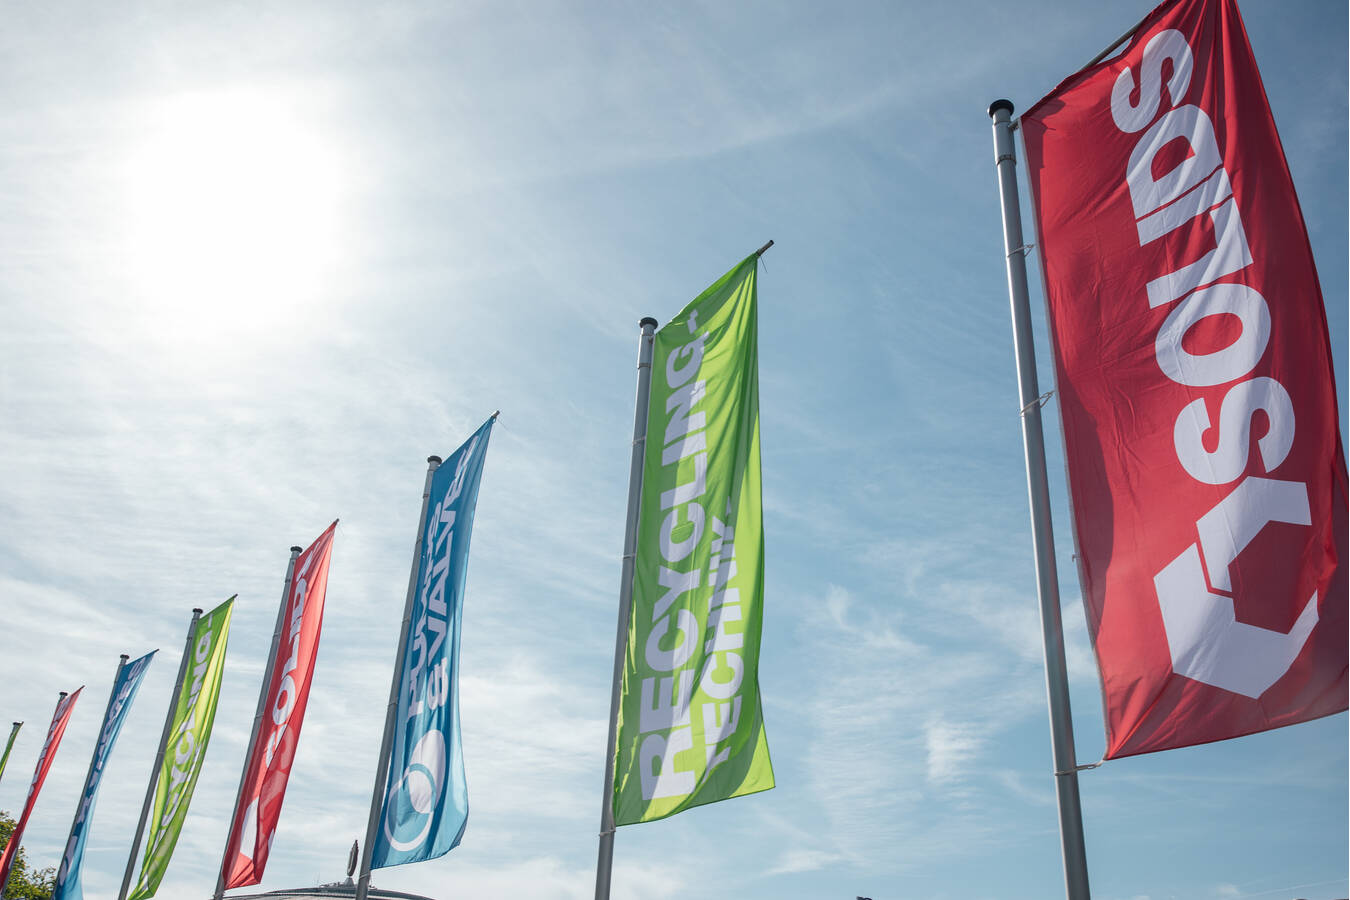 Solids, Pumps & Valves and Recycling for a consistent circular economy On 29 and 30 March 2023, Messe Dortmund will once again be dedicated to solids handling, pumps & valves and recycling.